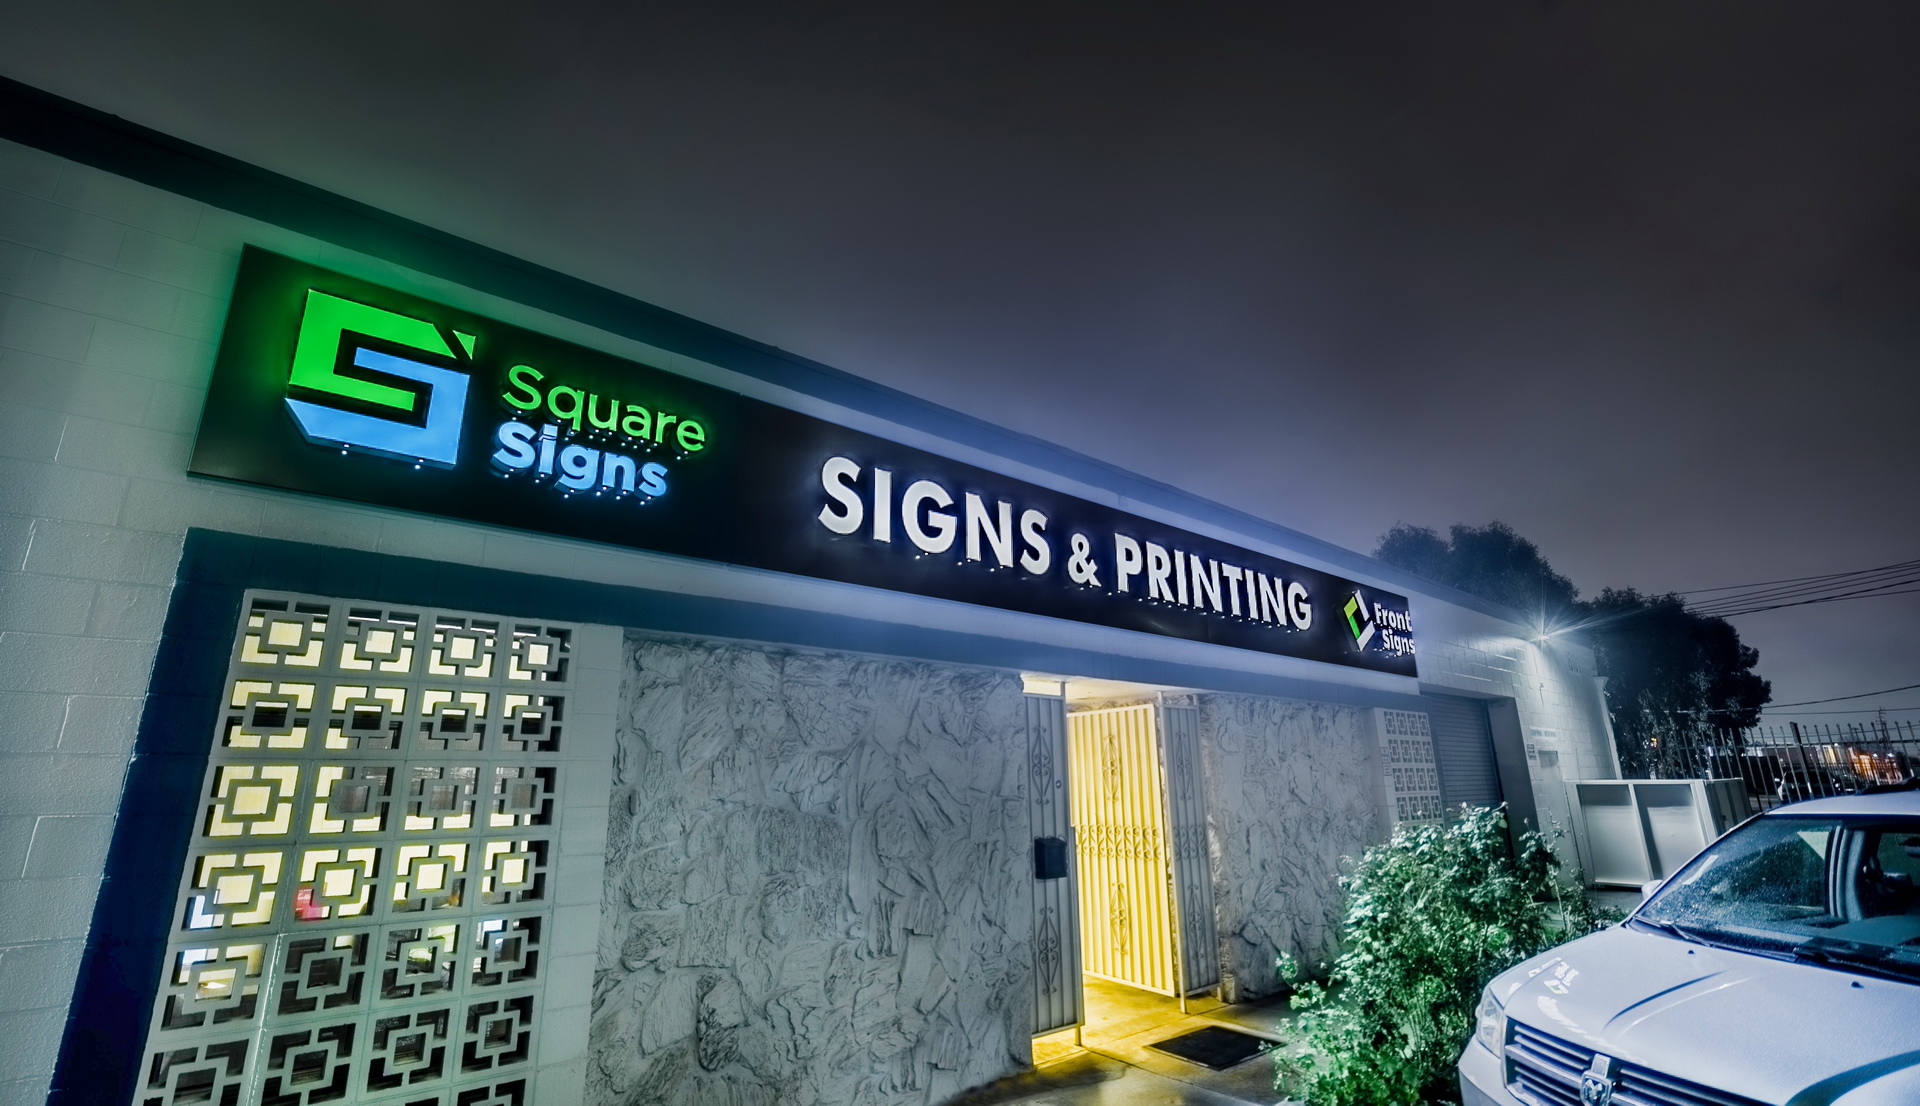 Square Signs